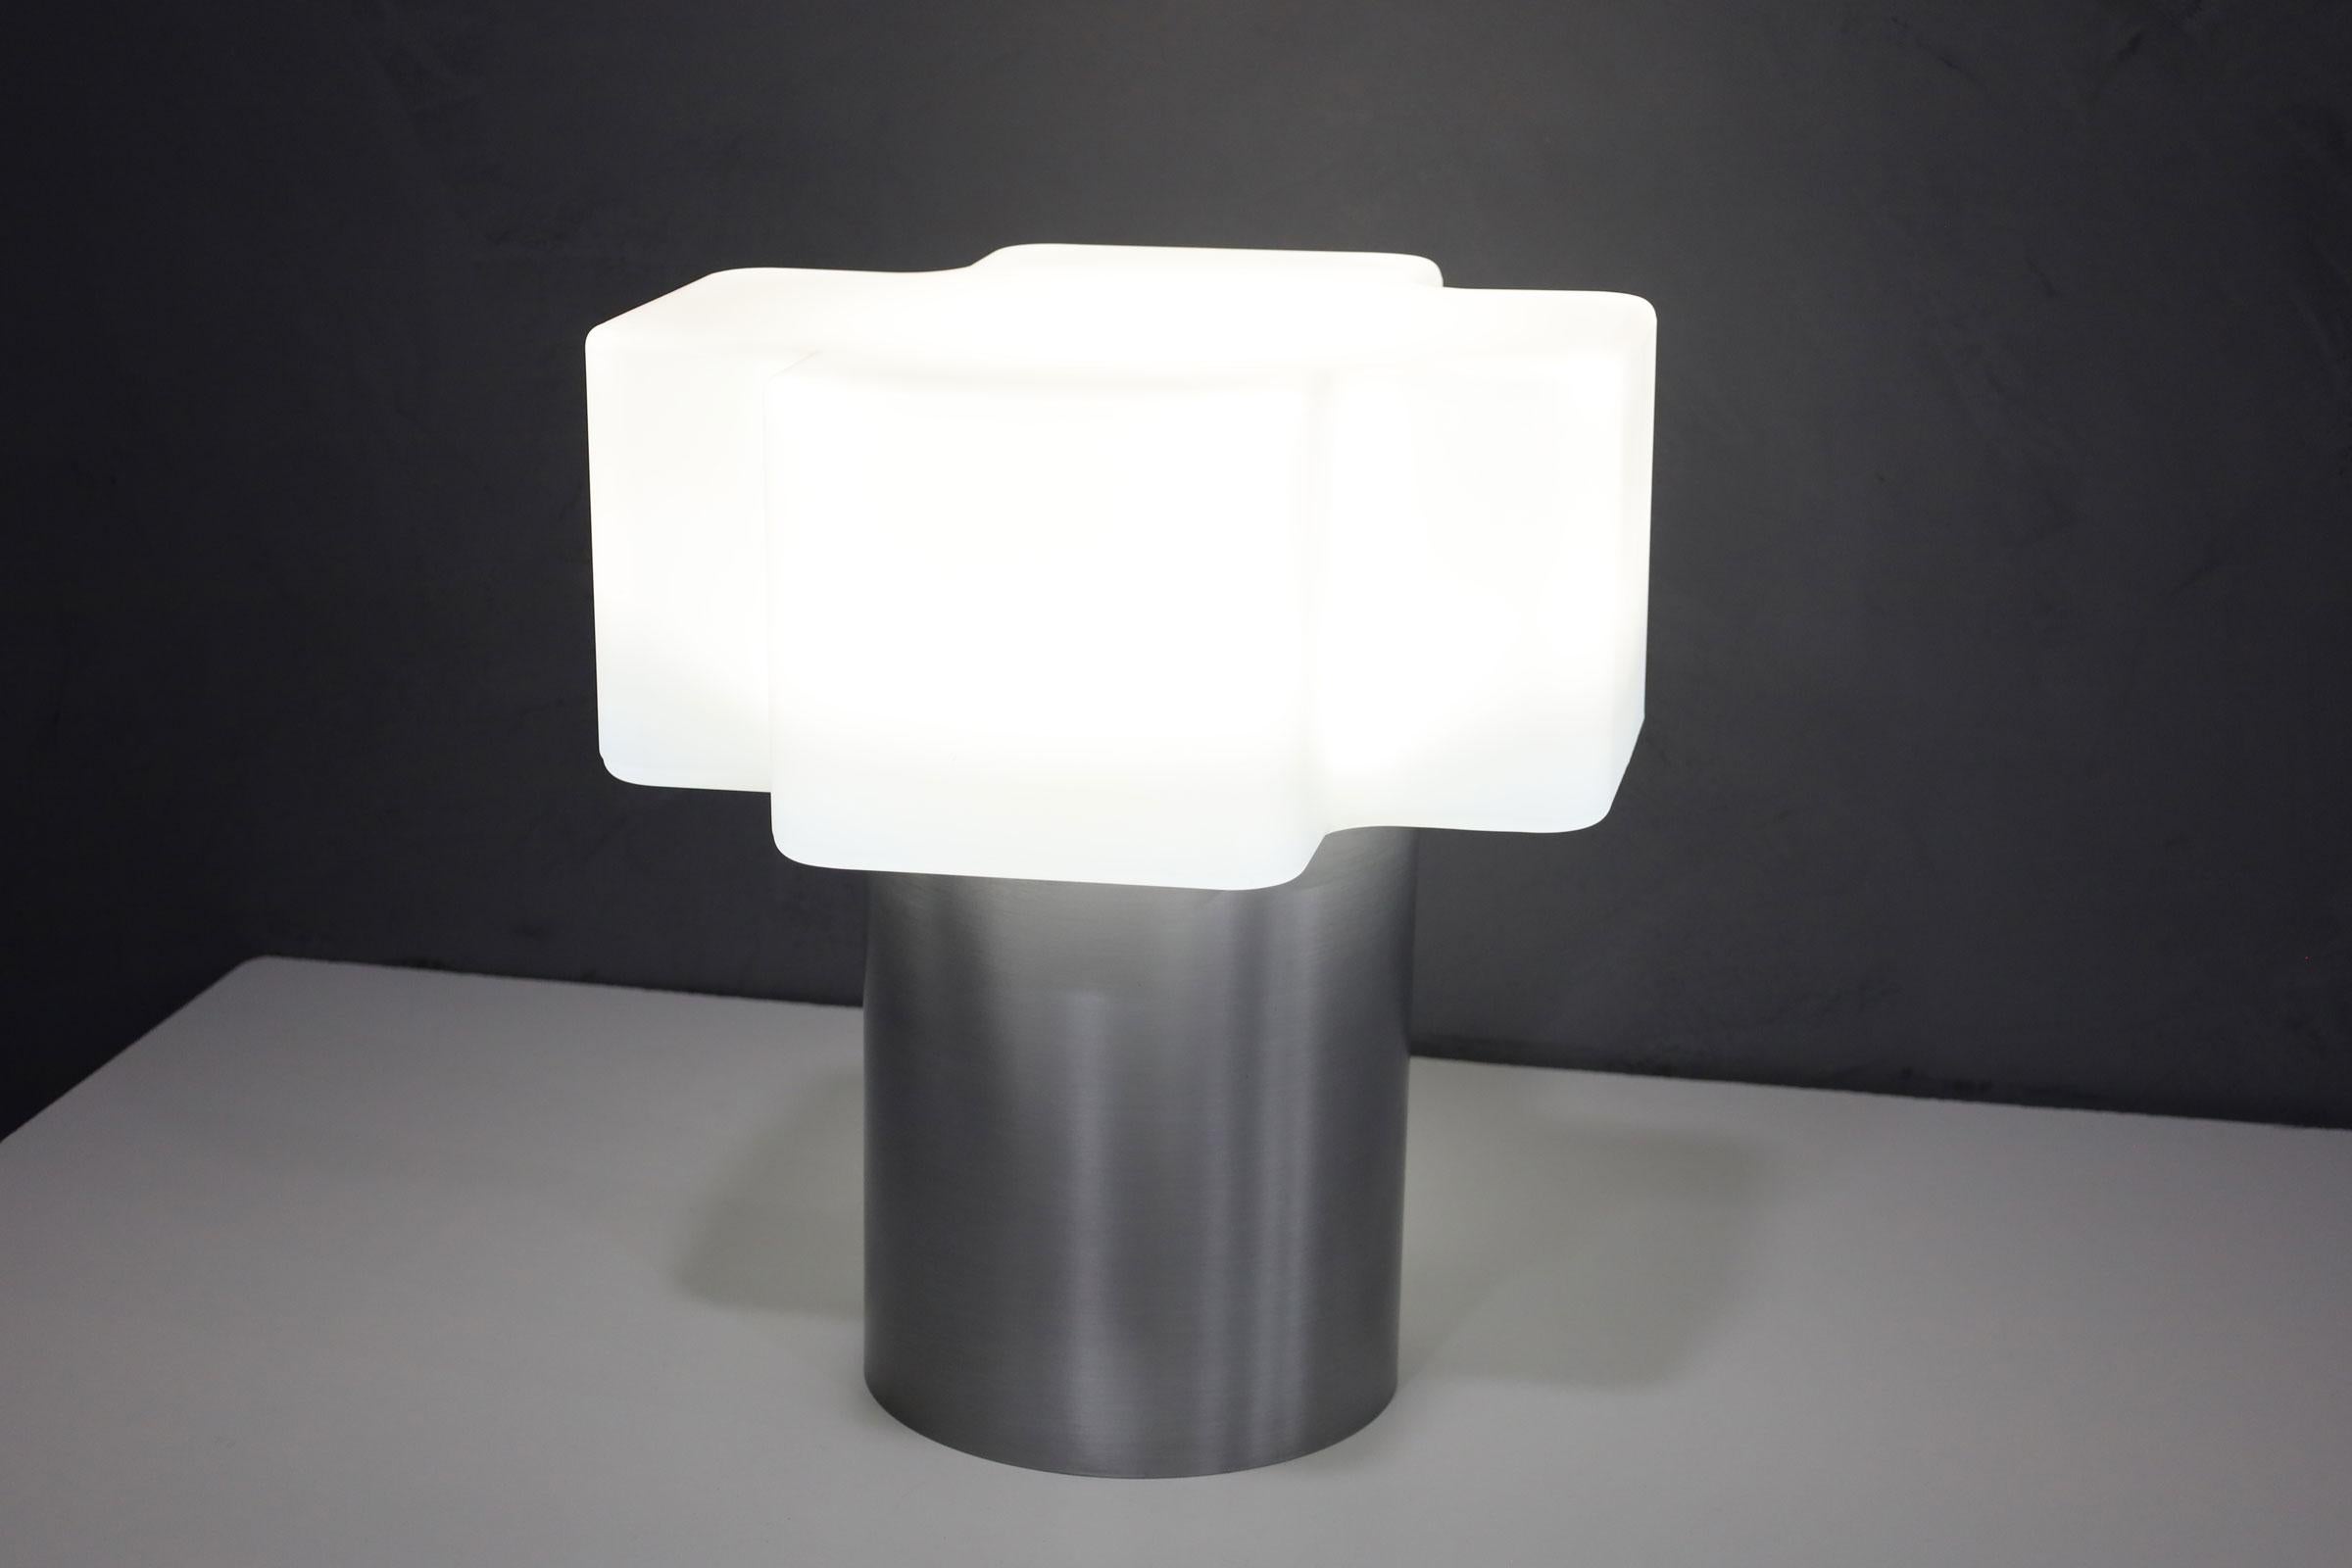 Unique table lamp with aluminum base and a 